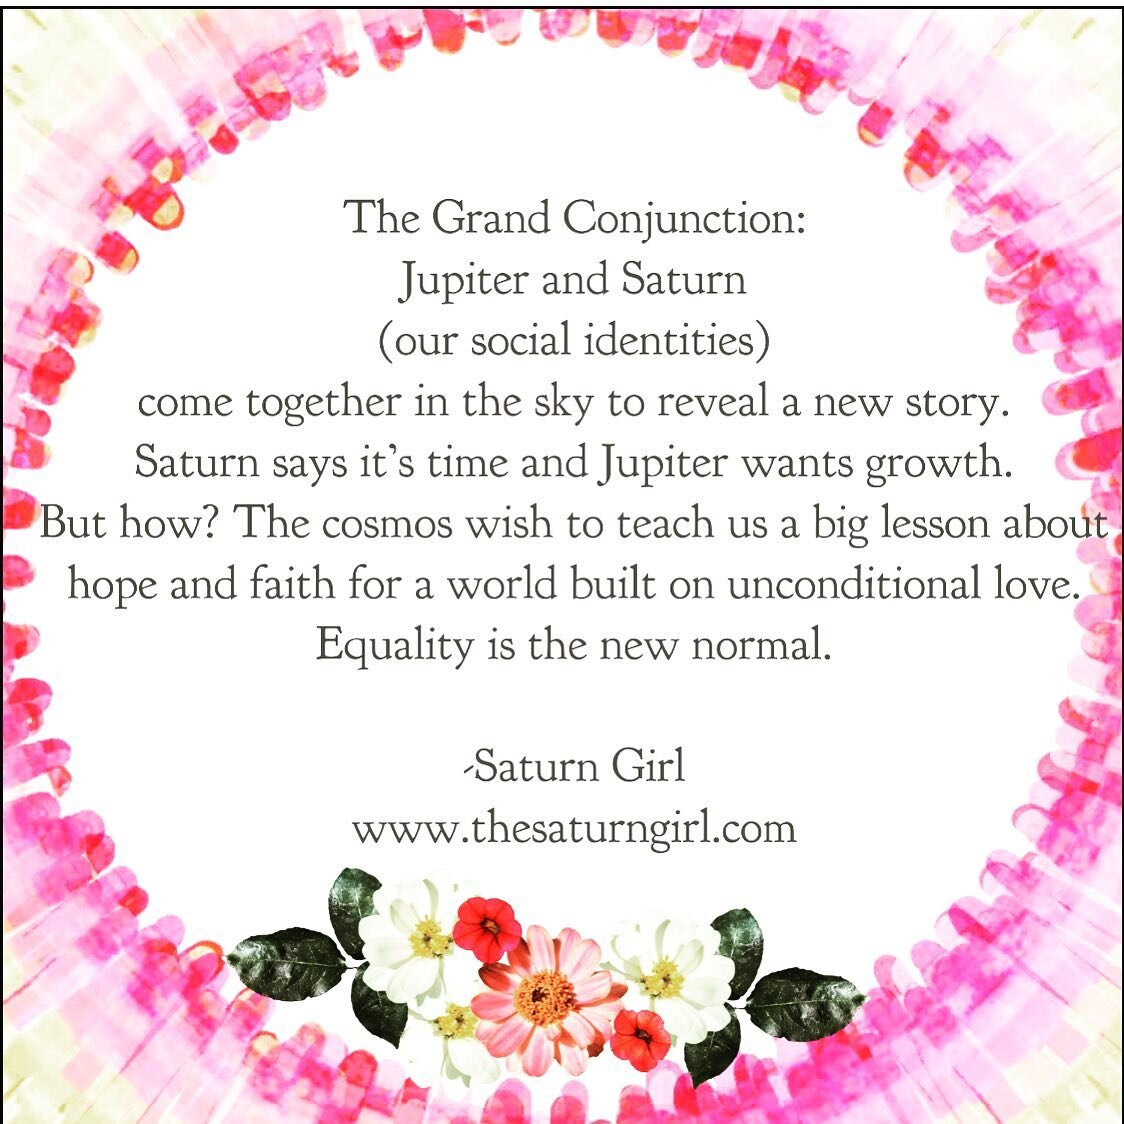 Here for this! December 21, 2020 represents a paradigm shift. Two cosmic heavy weights come together unveiling a new story about equality, hope and unconditional love. #saturninaquarius #jupiterinaquarius #grandconjunction2020 #youngastrologers #evol